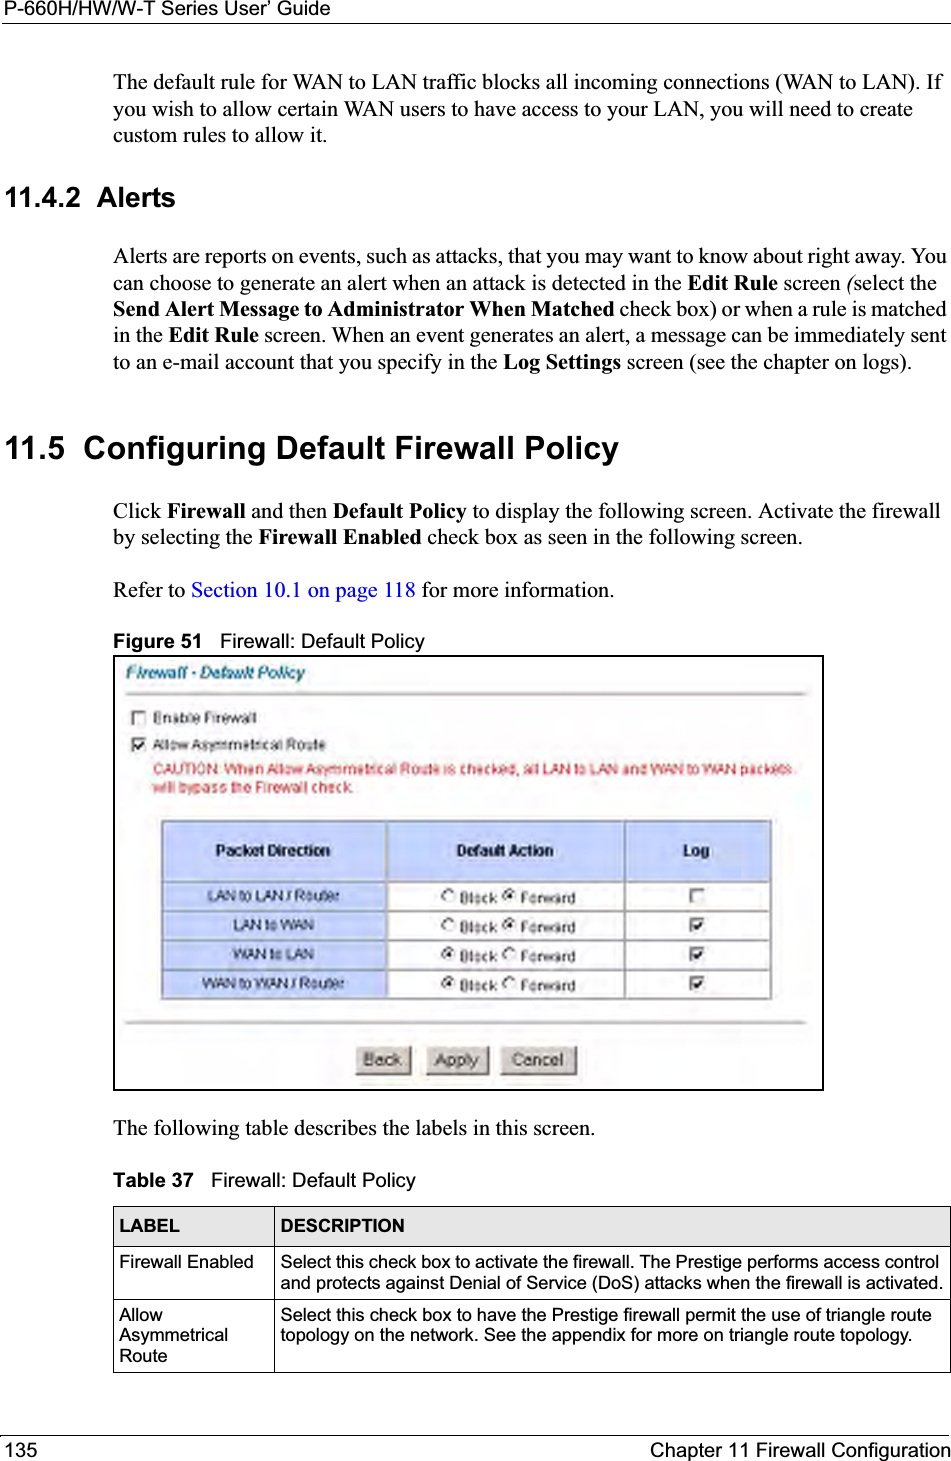 P-660H/HW/W-T Series User’ Guide135 Chapter 11 Firewall ConfigurationThe default rule for WAN to LAN traffic blocks all incoming connections (WAN to LAN). If you wish to allow certain WAN users to have access to your LAN, you will need to create custom rules to allow it. 11.4.2  AlertsAlerts are reports on events, such as attacks, that you may want to know about right away. You can choose to generate an alert when an attack is detected in the Edit Rule screen (select the Send Alert Message to Administrator When Matched check box) or when a rule is matched in the Edit Rule screen. When an event generates an alert, a message can be immediately sent to an e-mail account that you specify in the Log Settings screen (see the chapter on logs).11.5  Configuring Default Firewall Policy   Click Firewall and then Default Policy to display the following screen. Activate the firewall by selecting the Firewall Enabled check box as seen in the following screen.Refer to Section 10.1 on page 118 for more information. Figure 51   Firewall: Default PolicyThe following table describes the labels in this screen. Table 37   Firewall: Default PolicyLABEL DESCRIPTIONFirewall Enabled Select this check box to activate the firewall. The Prestige performs access control and protects against Denial of Service (DoS) attacks when the firewall is activated.Allow Asymmetrical RouteSelect this check box to have the Prestige firewall permit the use of triangle route topology on the network. See the appendix for more on triangle route topology.